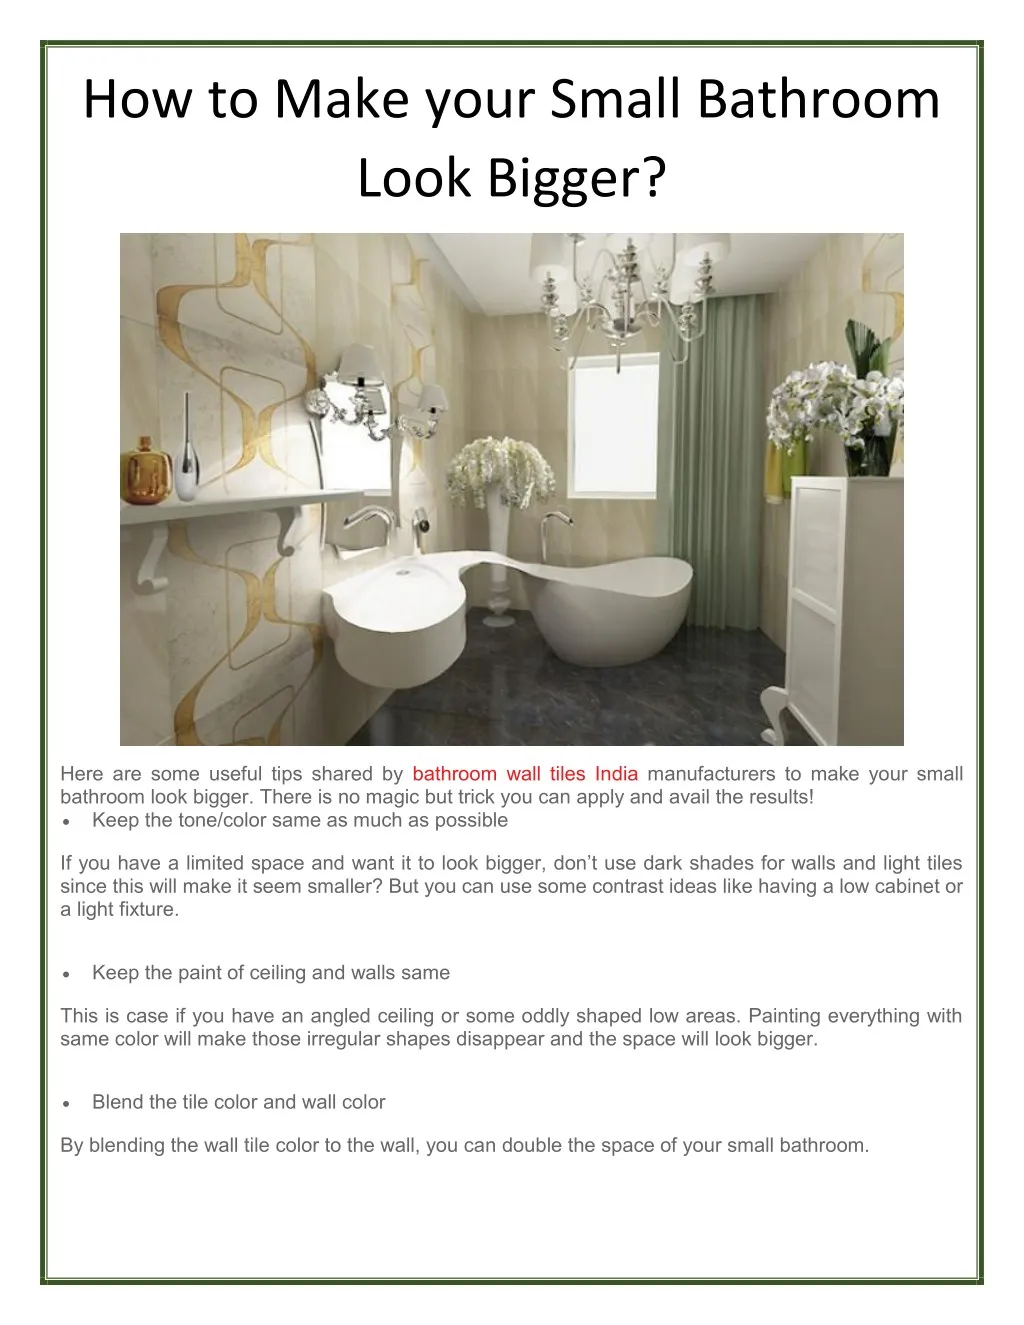 how to make your small bathroom look bigger